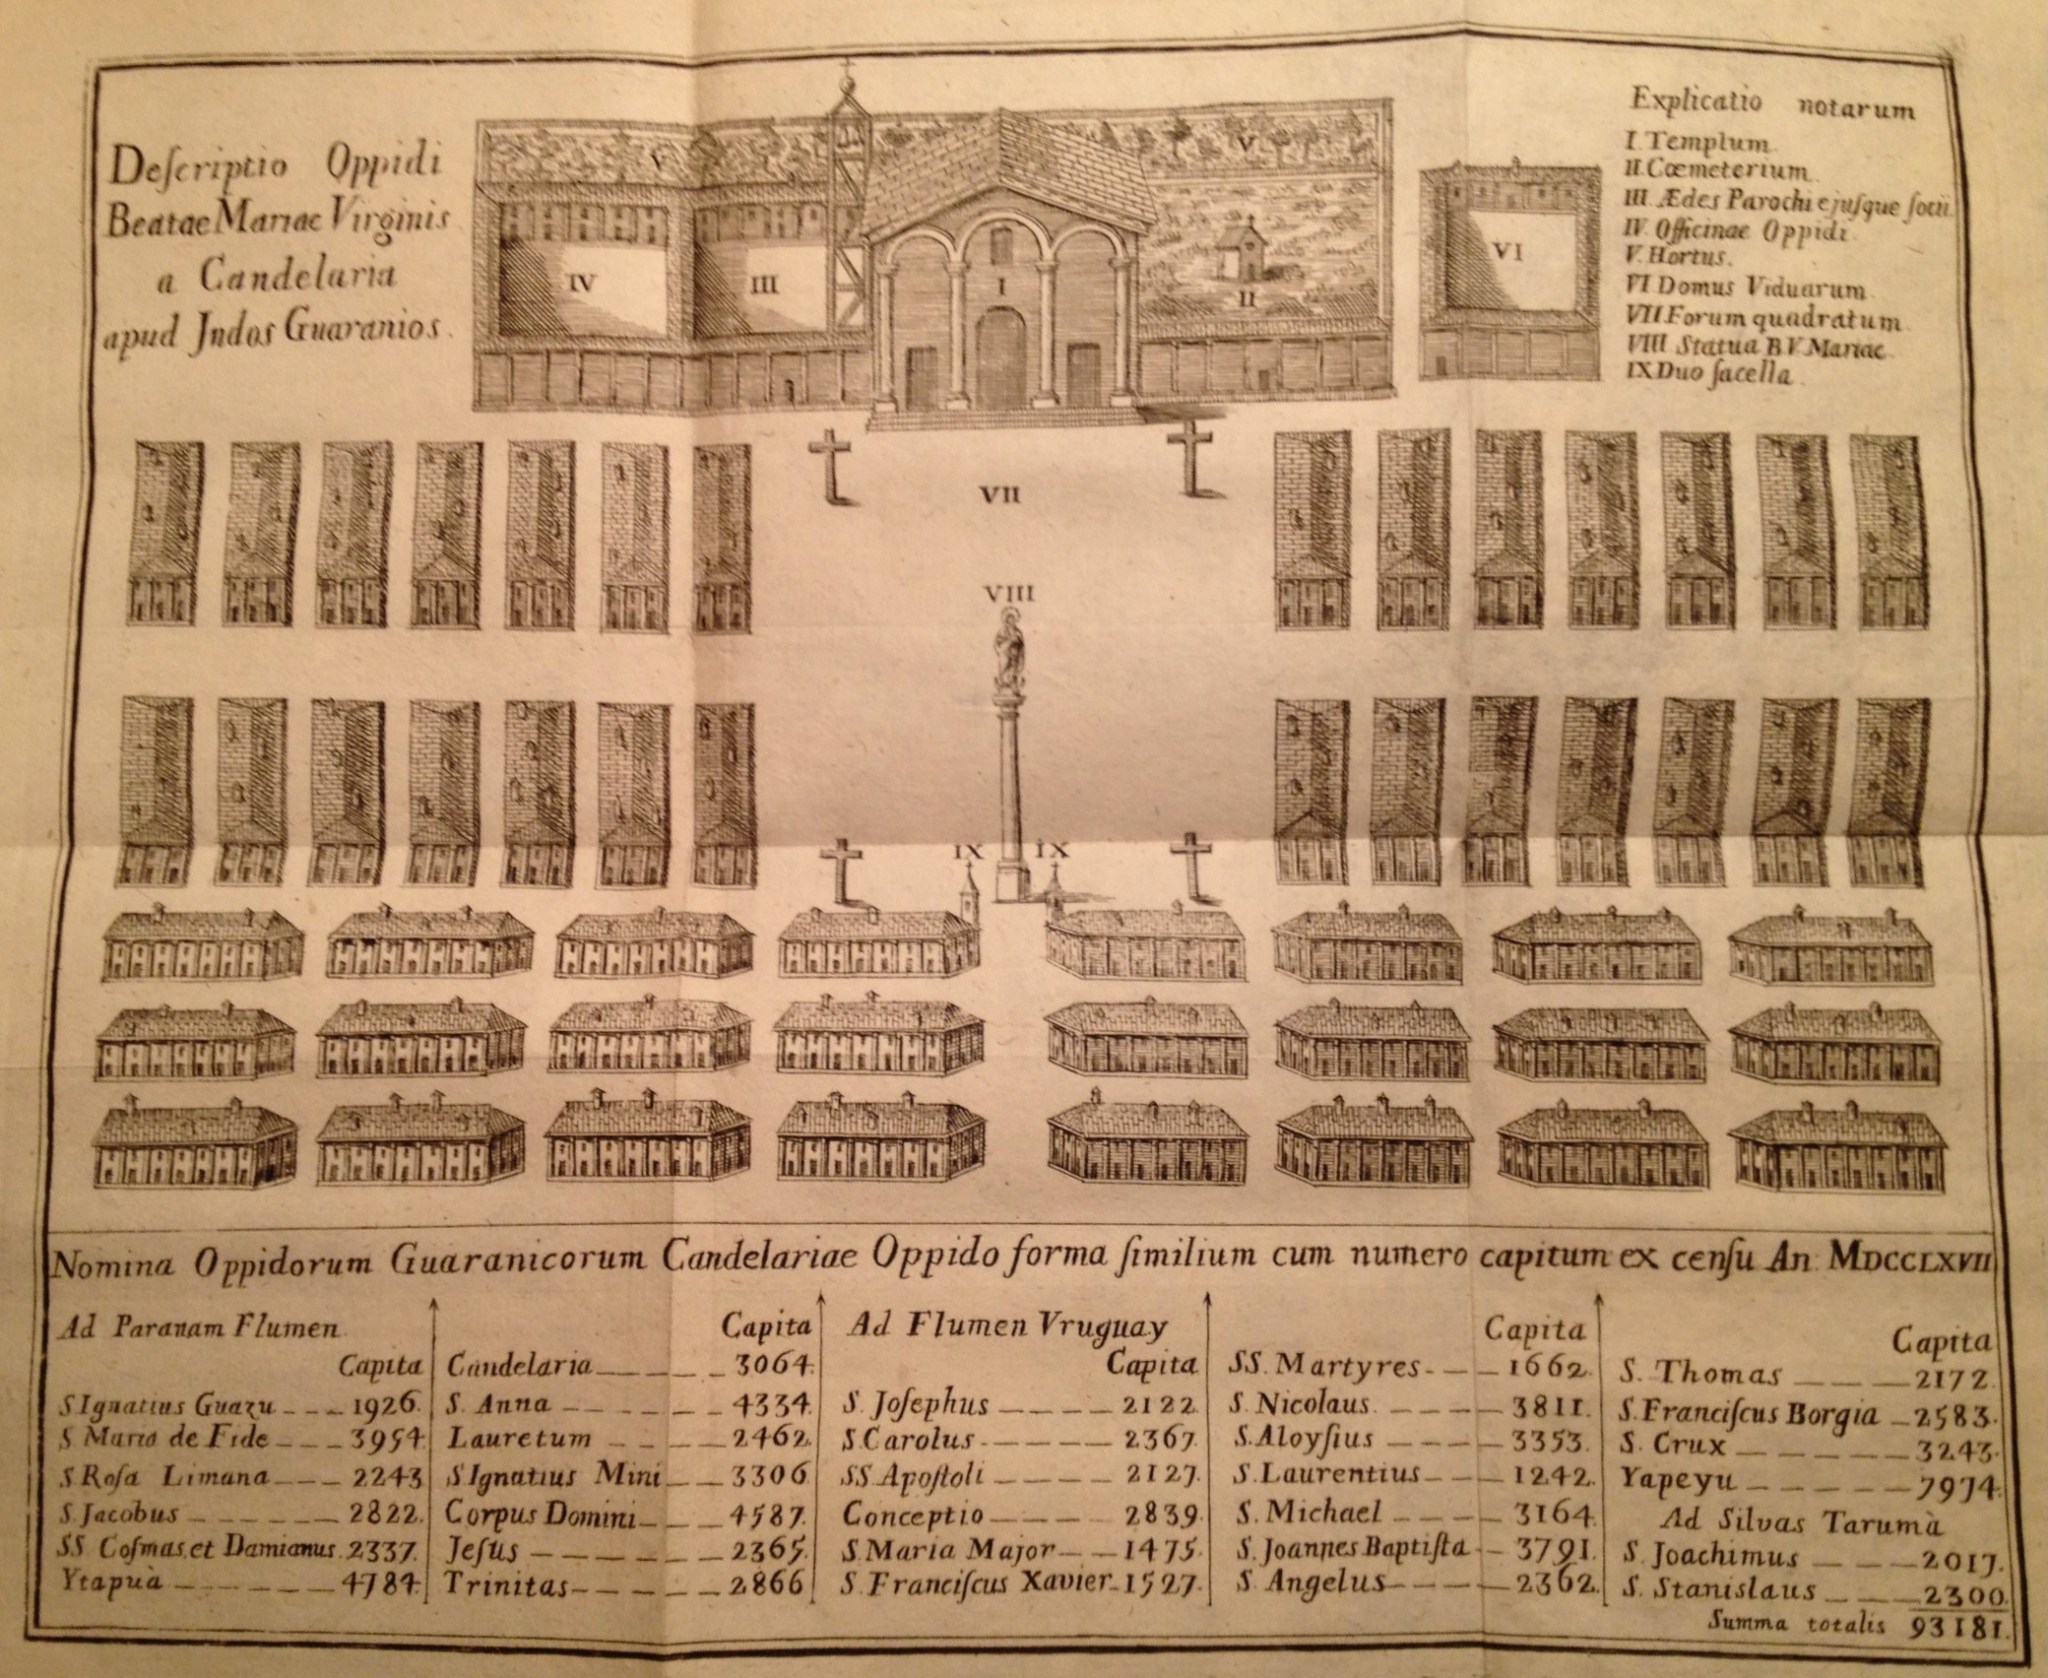 Site plan of Calendaria that includes the 1767 census for all the towns under Jesuit administration